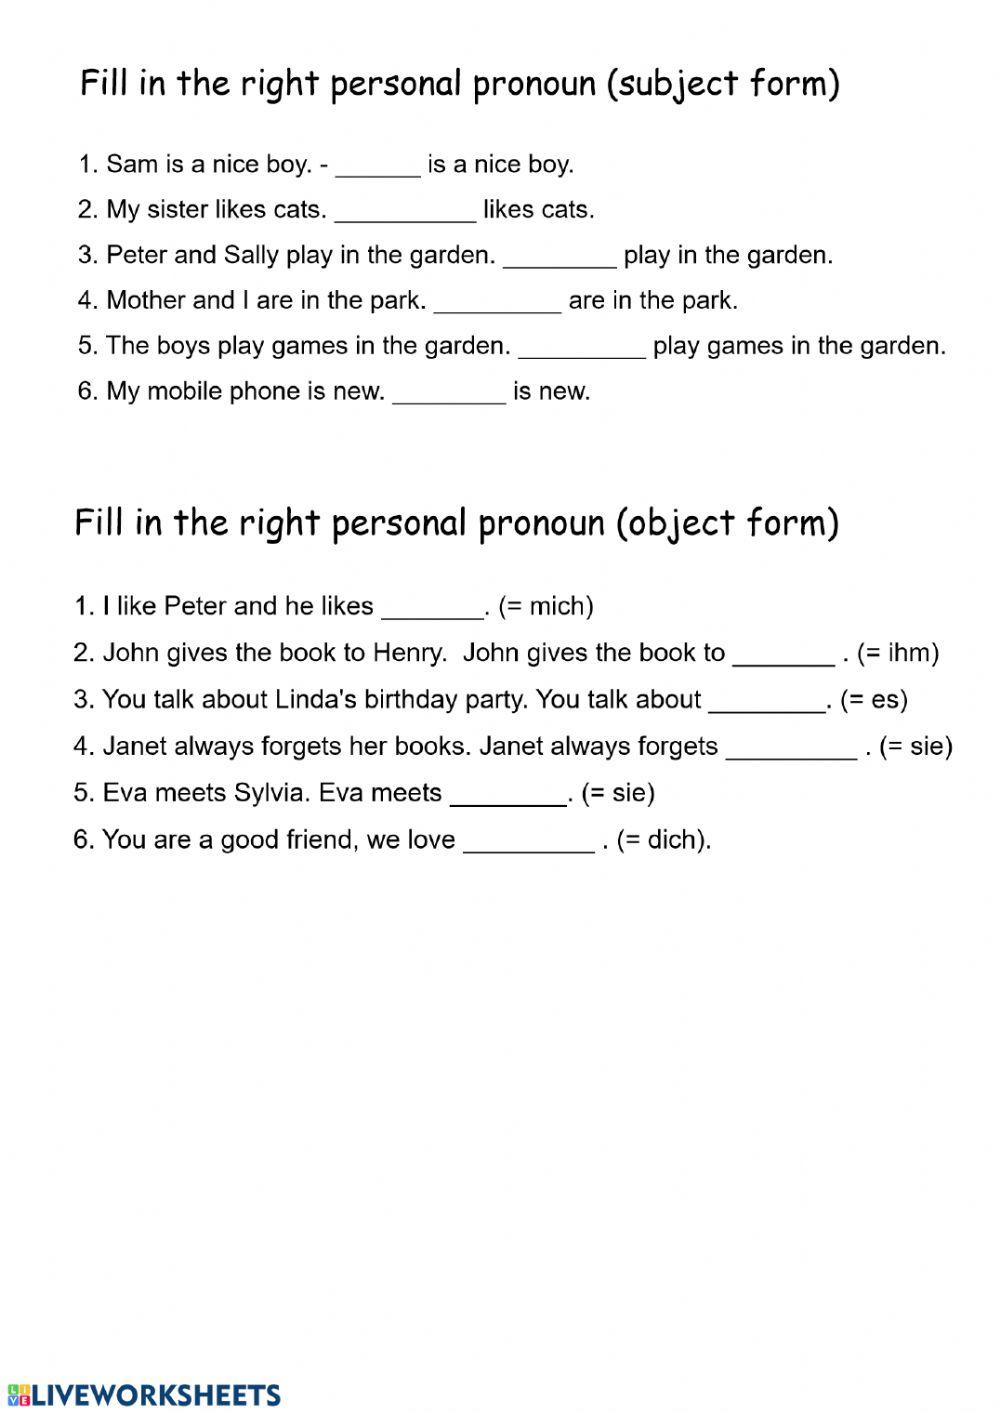 Personal pronouns - subject and object form